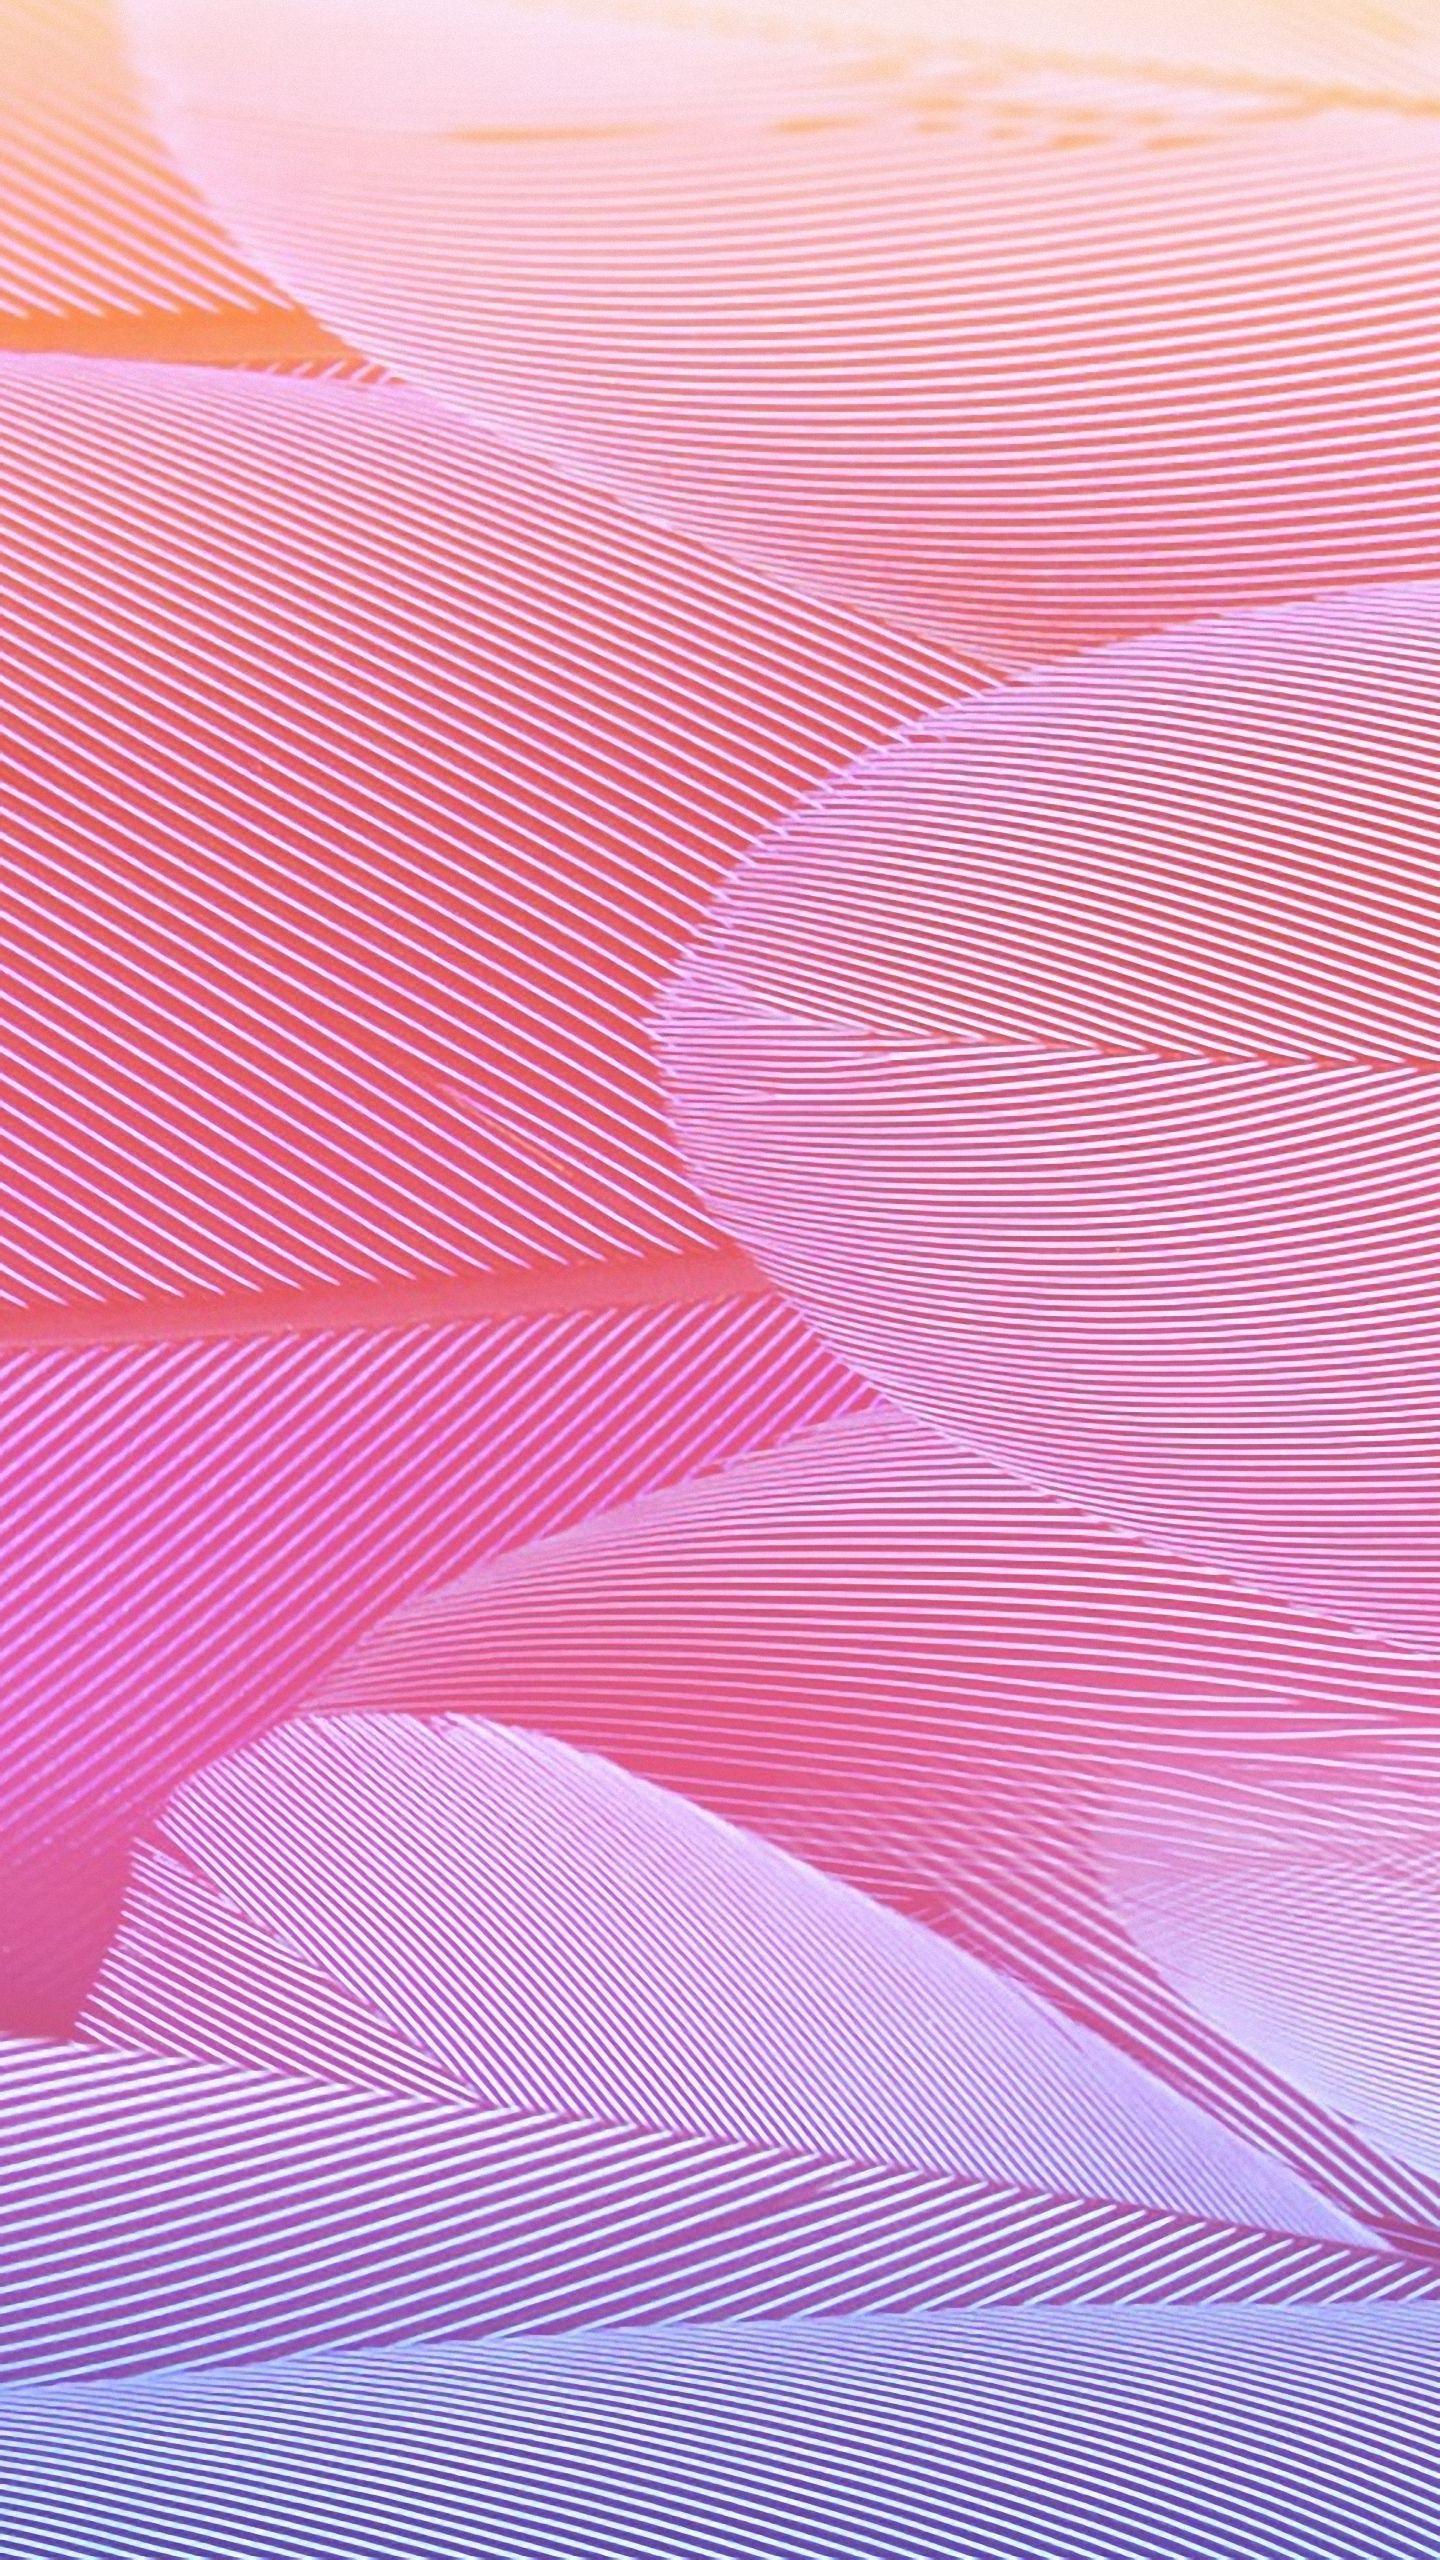 Abstract Pink Feather Texture samsung galaxy note 4 Wallpaper HD